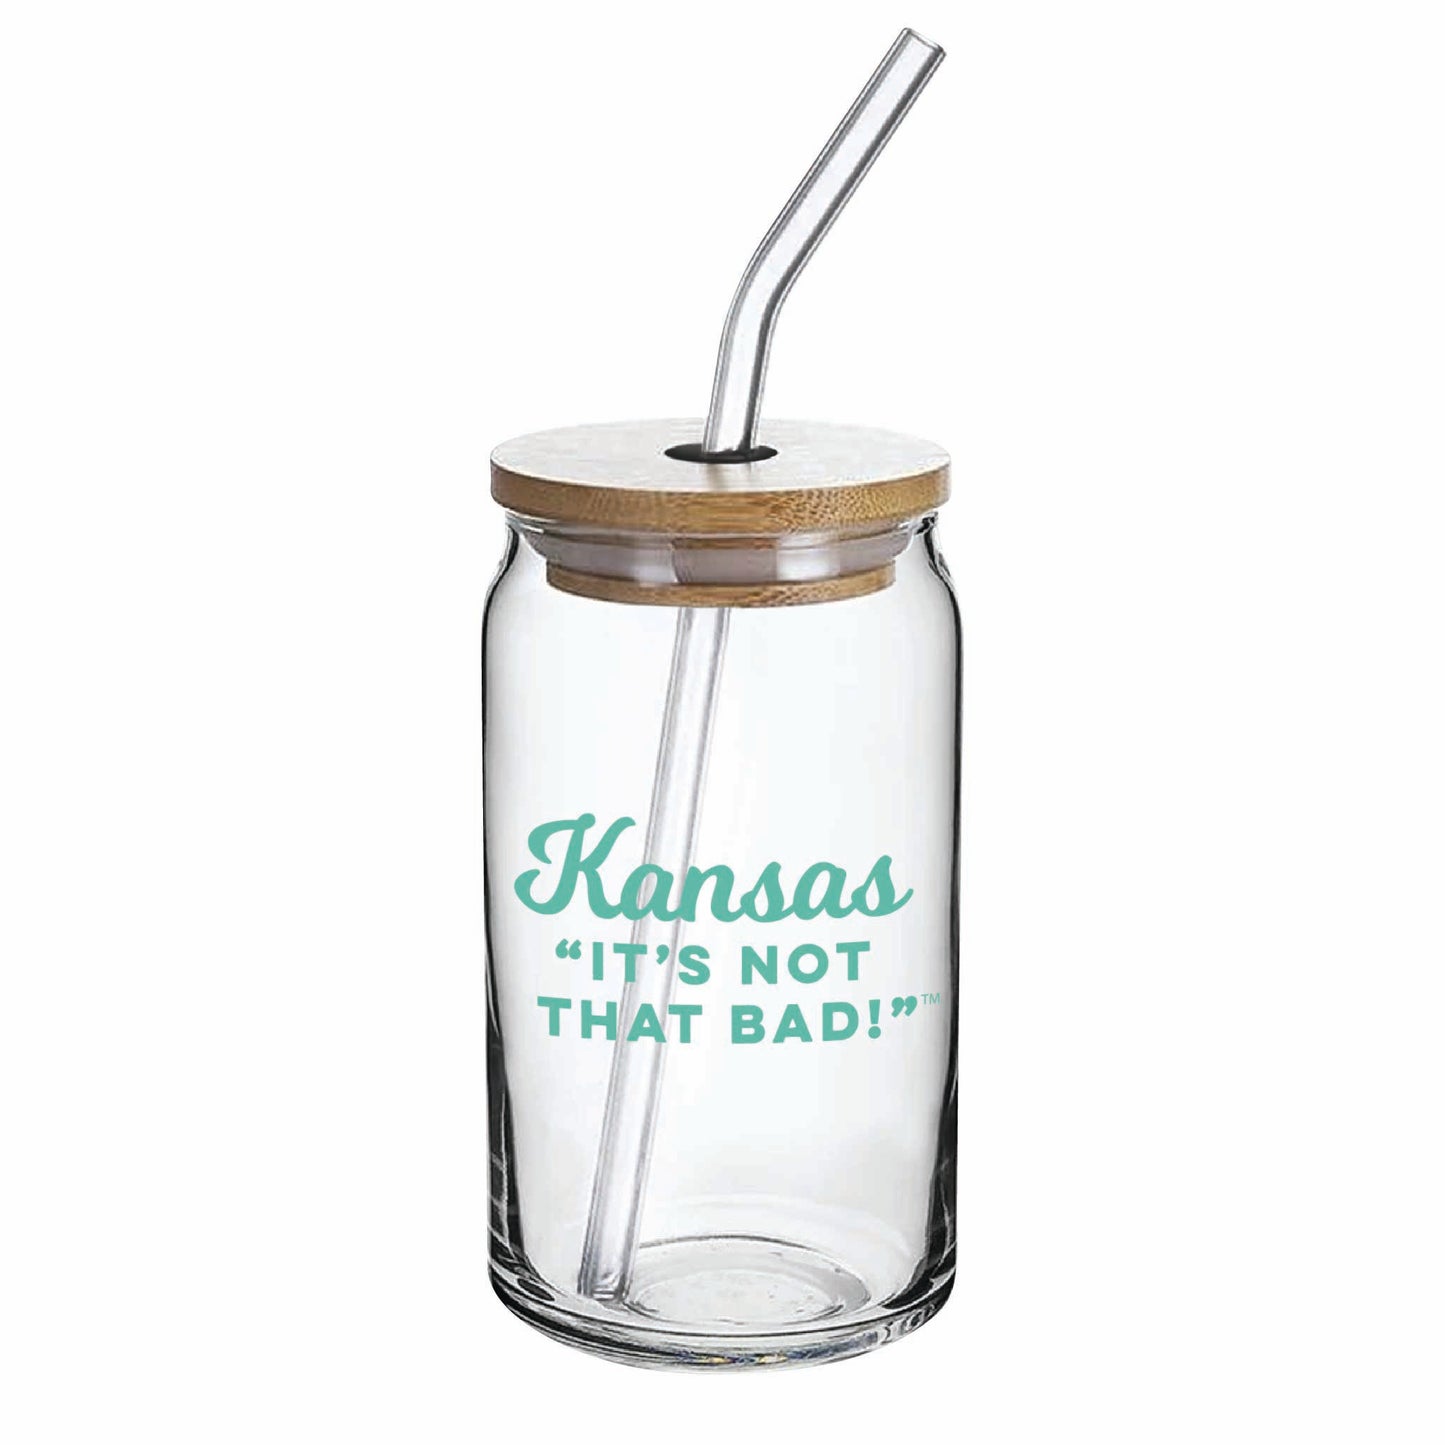 Kansas "It's Not That Bad" Green Can Glass